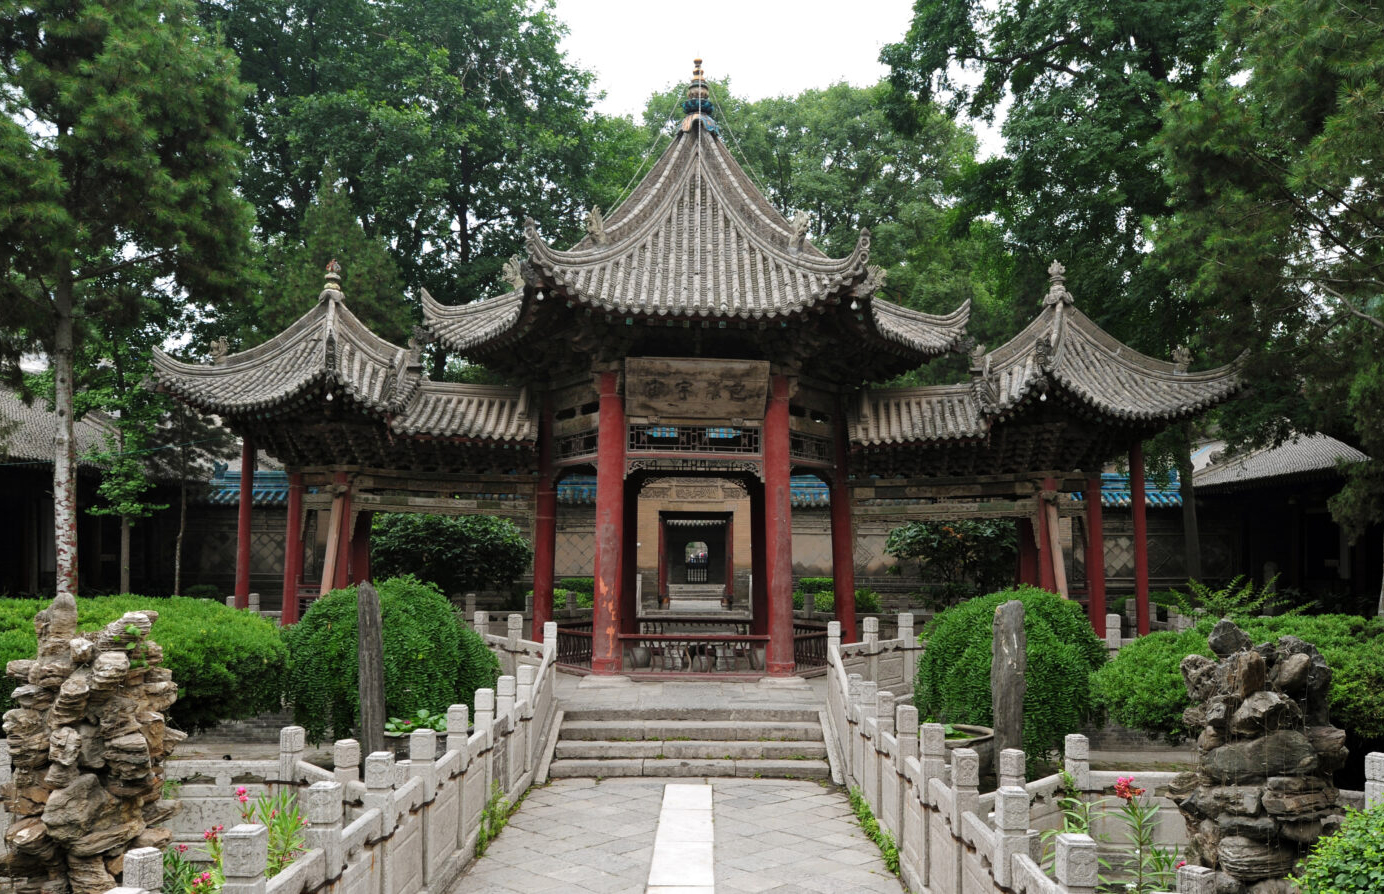 Coming Soon: The Great Mosque of Xi’an